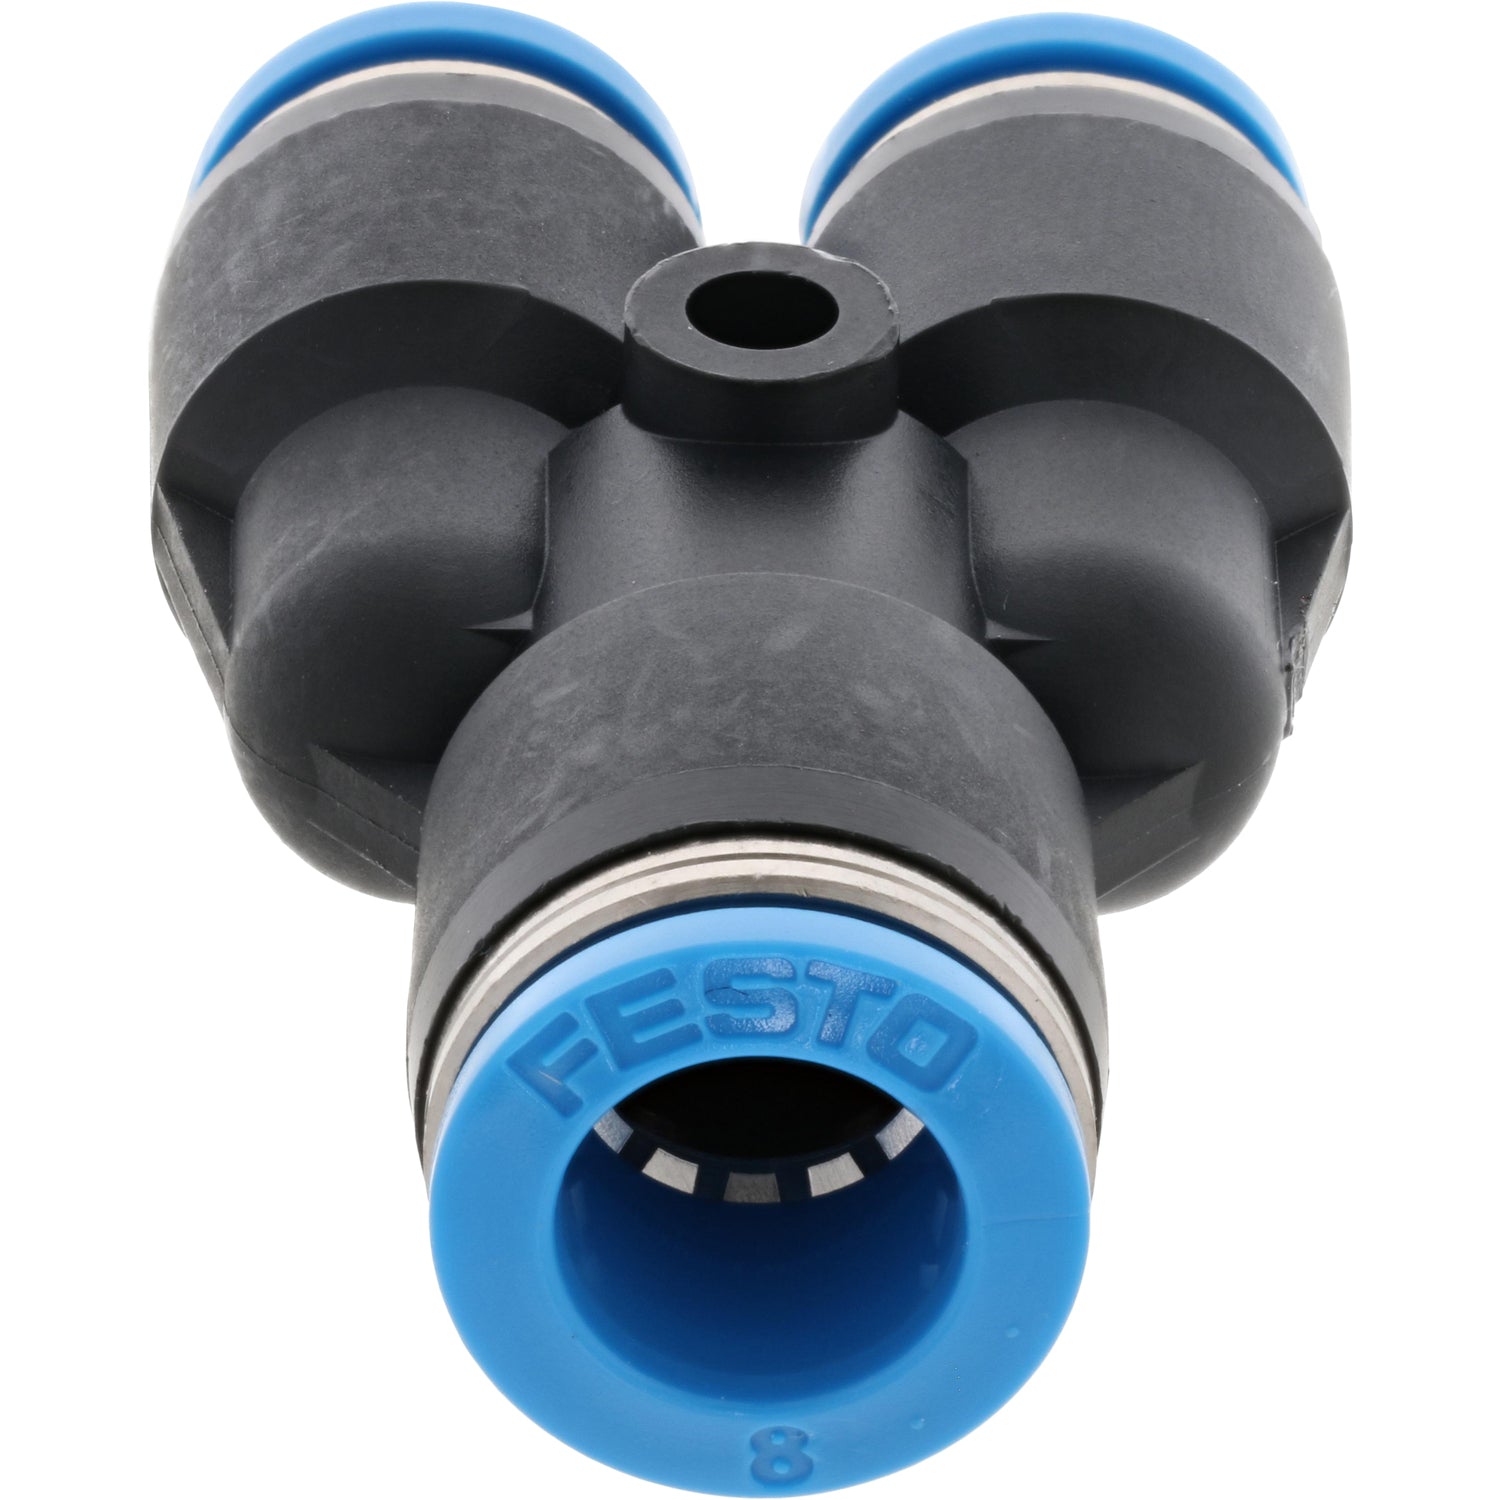 Black and blue plastic push connect Y-fitting. The part is showing one open blue port with &quot;Festo&quot; and the number eight stamped into the plastic. Part is shown on white background. 